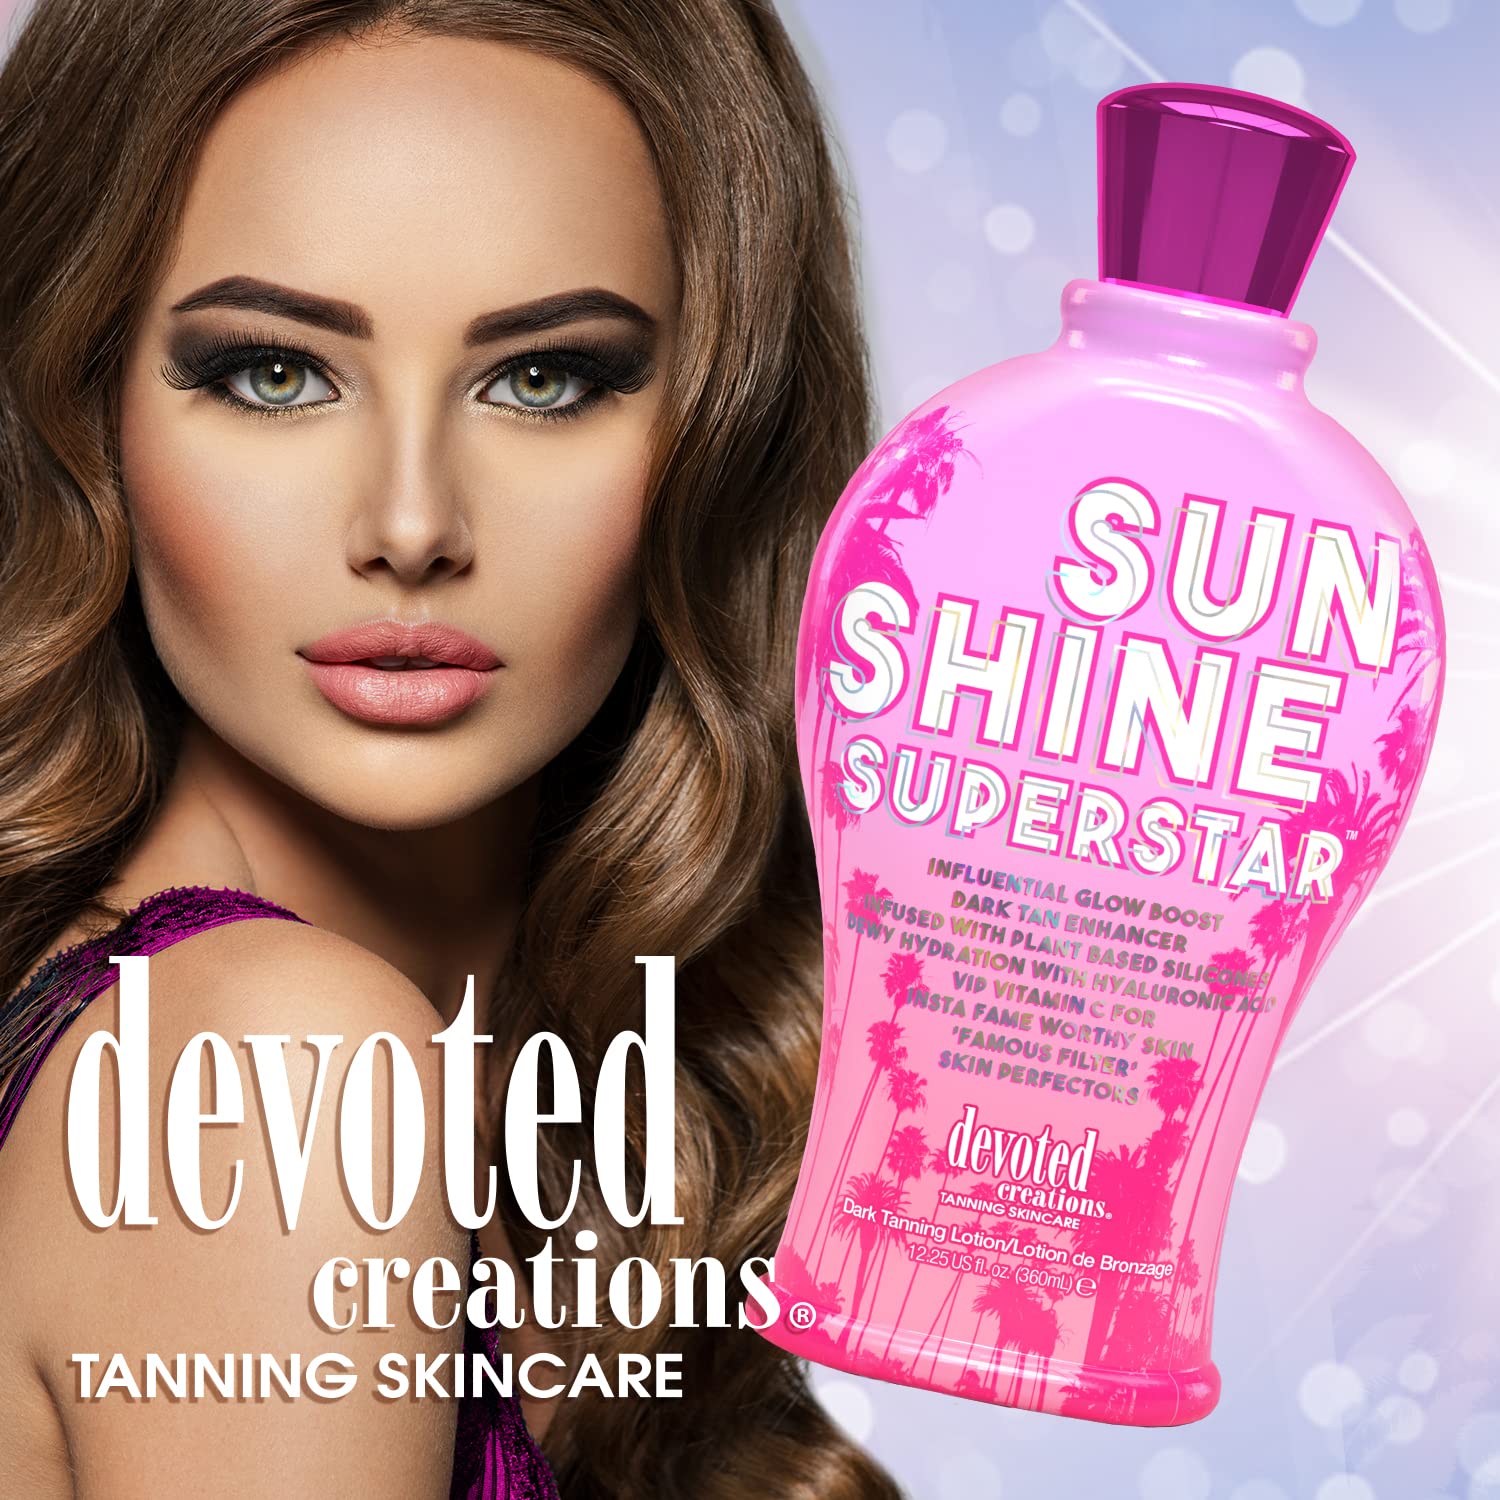 Devoted Creations Sunshine Superstar - Influential Glow Boost Dark Tan Enhancer - Infused with Plant Based Silicones Skin Smoothing Hyaluronic Acid - VIP Vitamin C for Insta Fame Worthy Skin - Formulated with the ‘Famous Filter’ 4K Skin Perfectors - 12.25